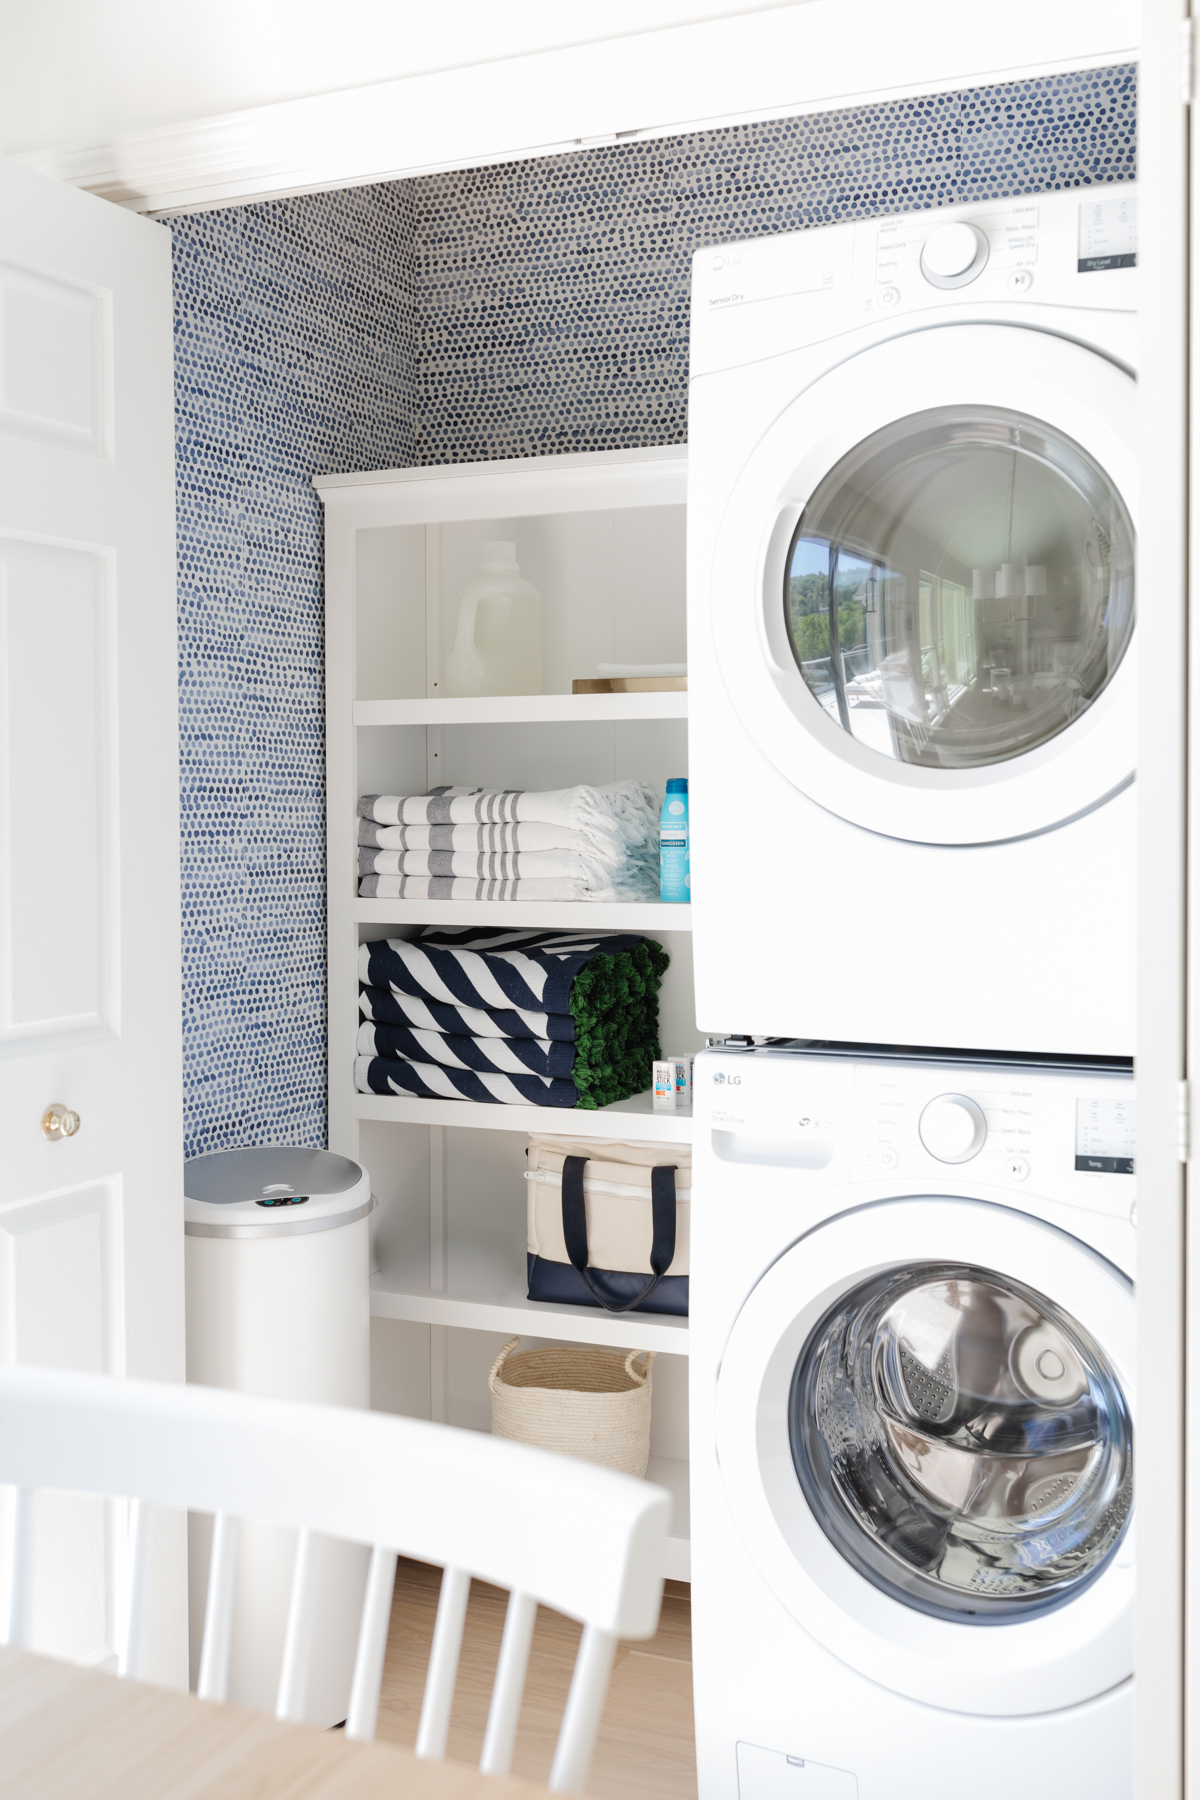 A laundry closet with blue and white Amazon wallpaper on the walls.